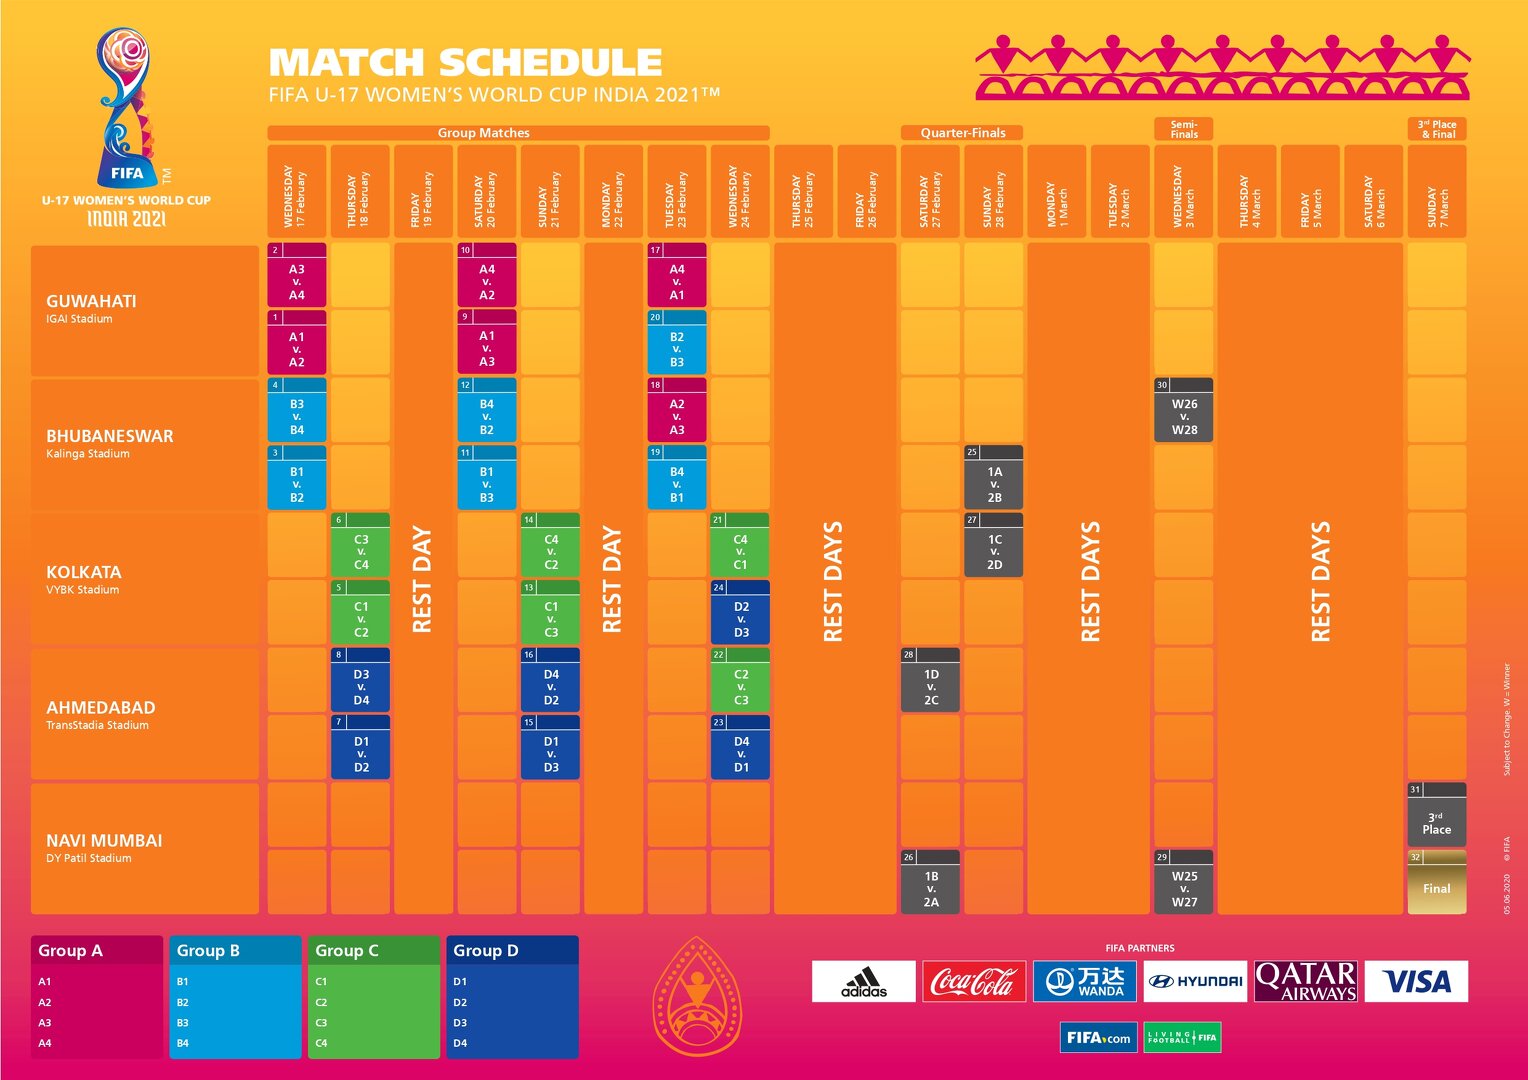 FIFA releases revised schedule of U-17 Women's World Cup